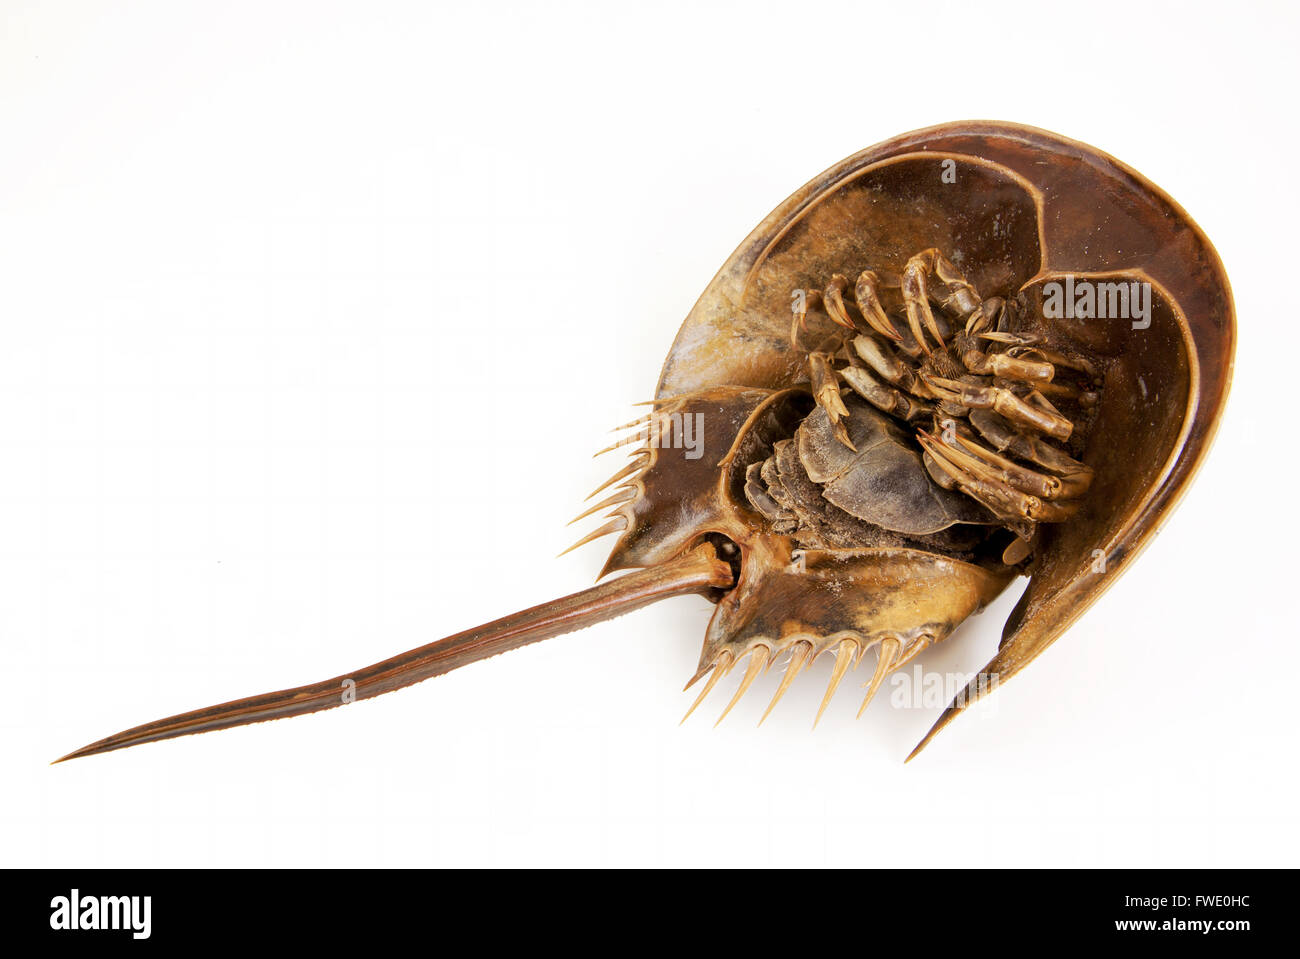 a large marine arthropod with a domed horseshoe-shaped shell, a long tail-spine, and ten legs. on isolated white background with Stock Photo